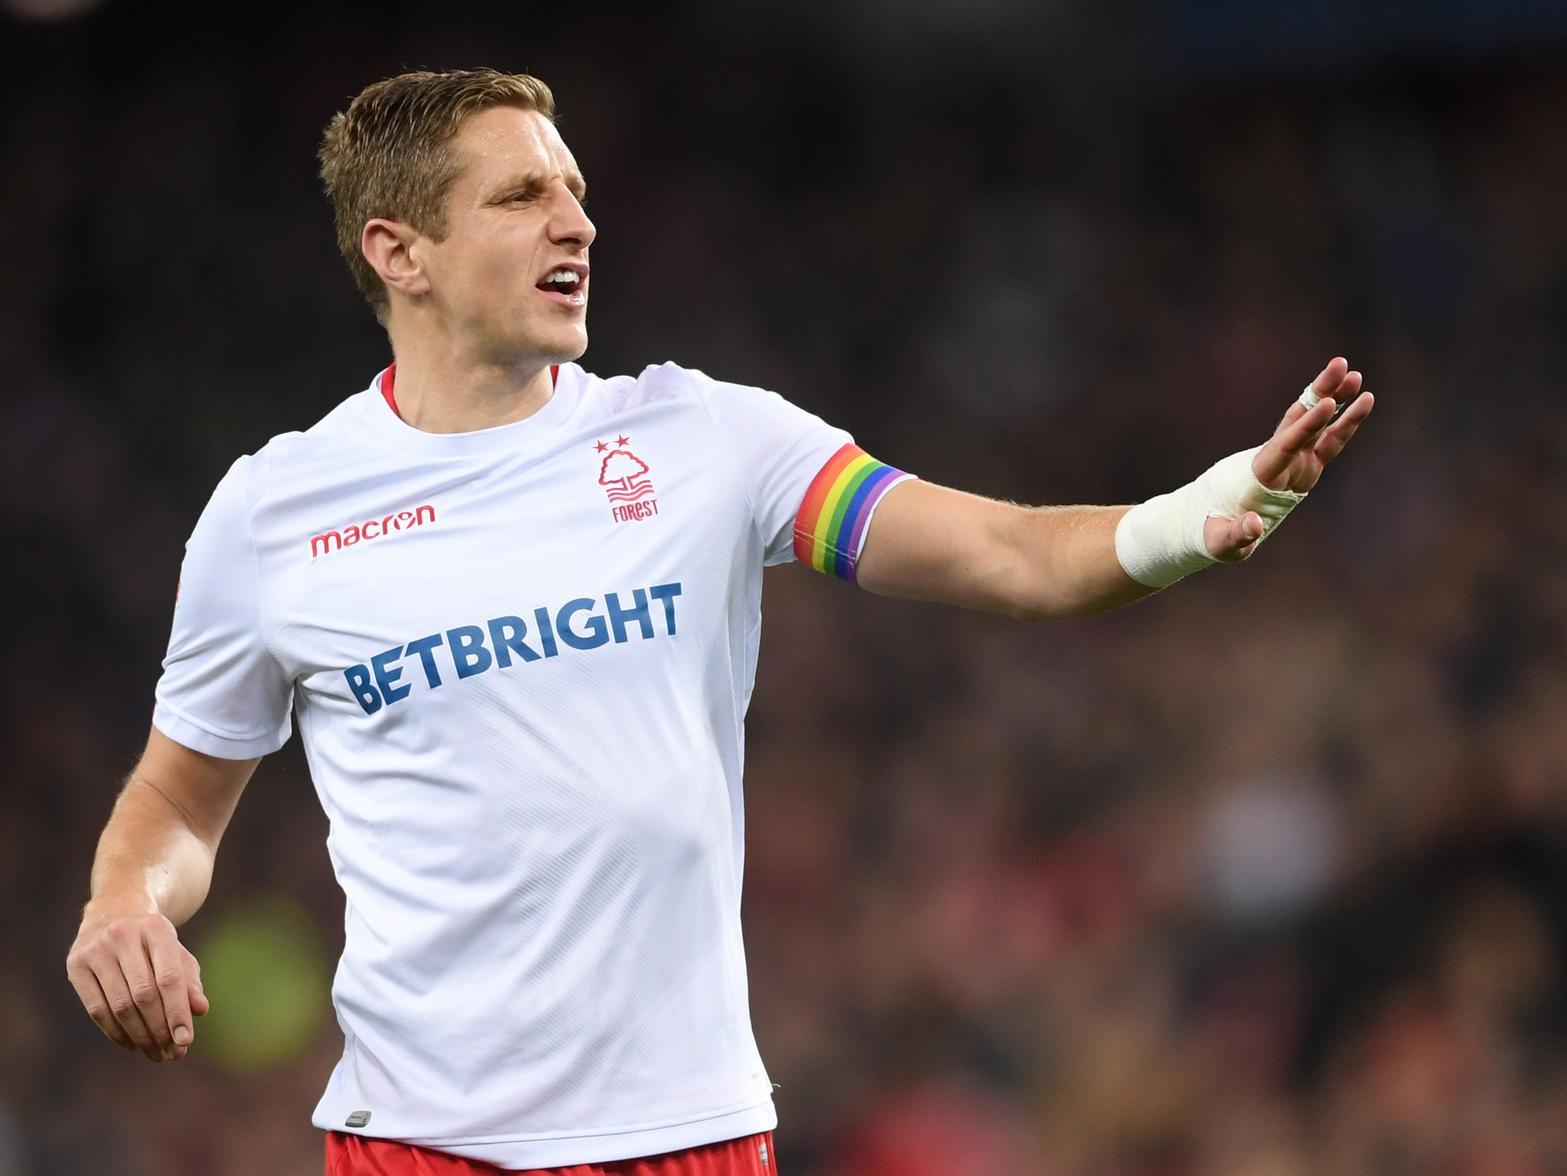 Nottingham Forest look set to welcome captain Michael Dawson back into their starting XI, after battling back from a calf injury. The 36-year-old hasn't featured since September. (Nottingham Post)